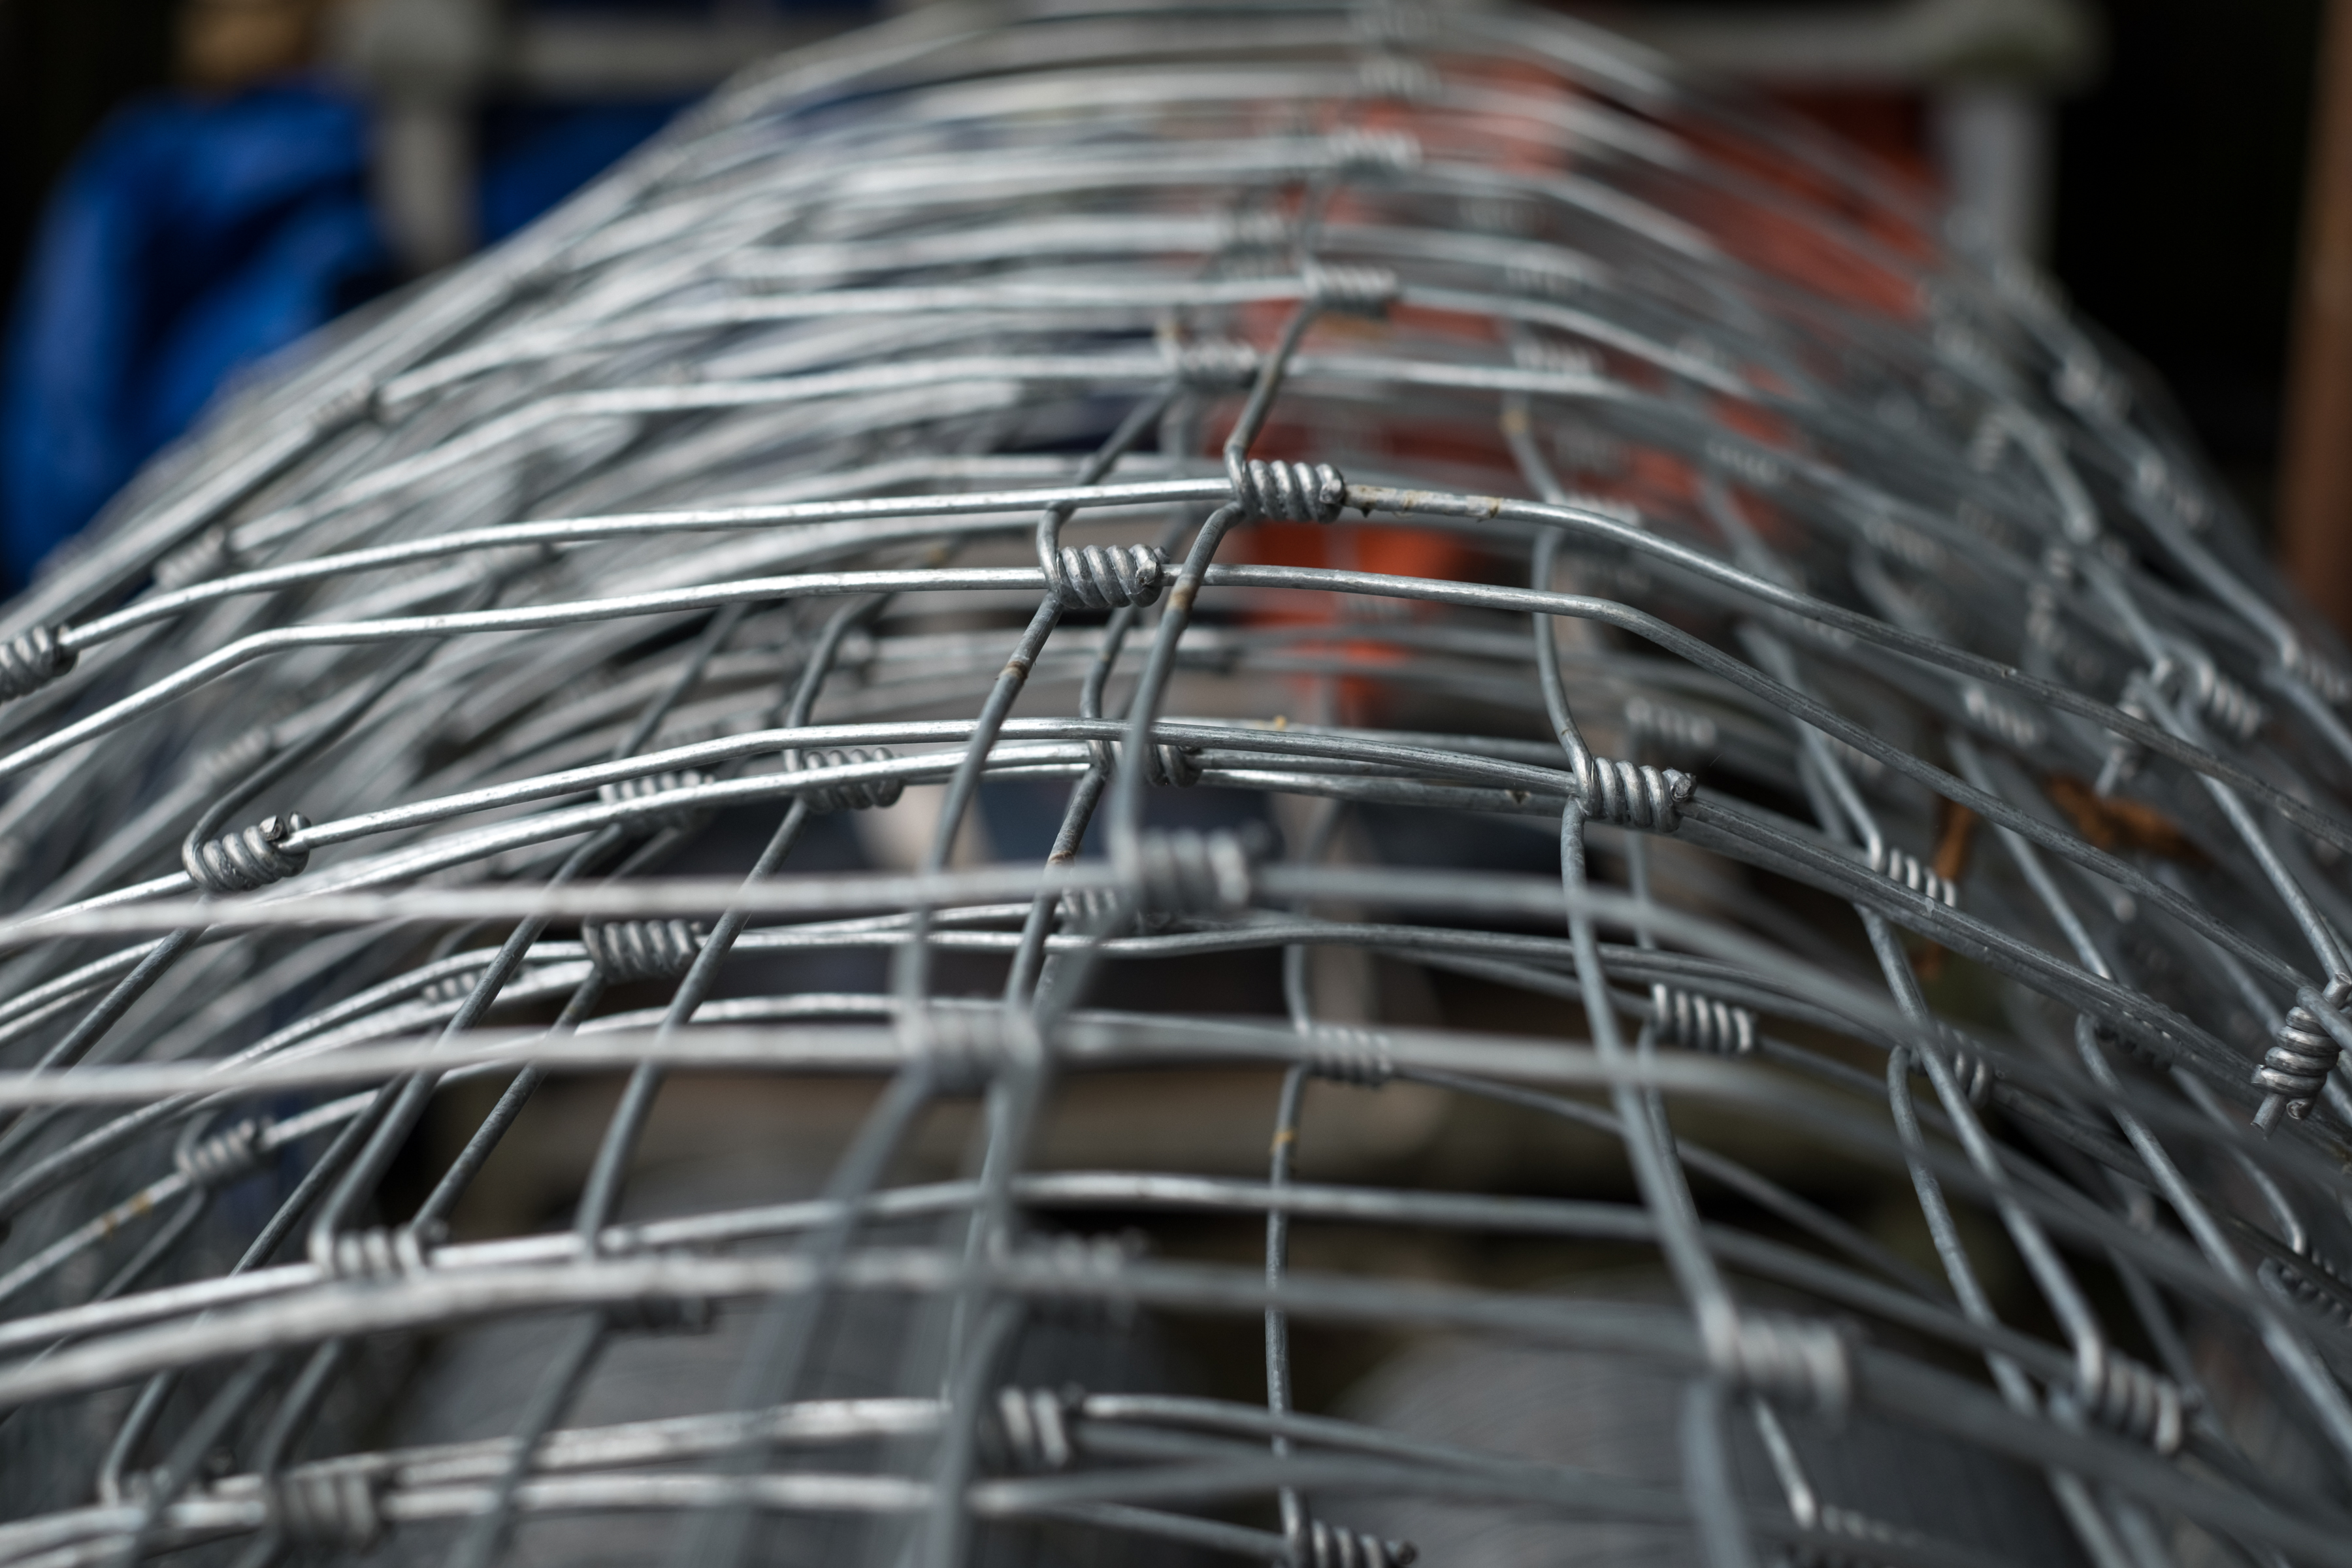 A roll of stock wire that can be used for commercial fencing purposes.